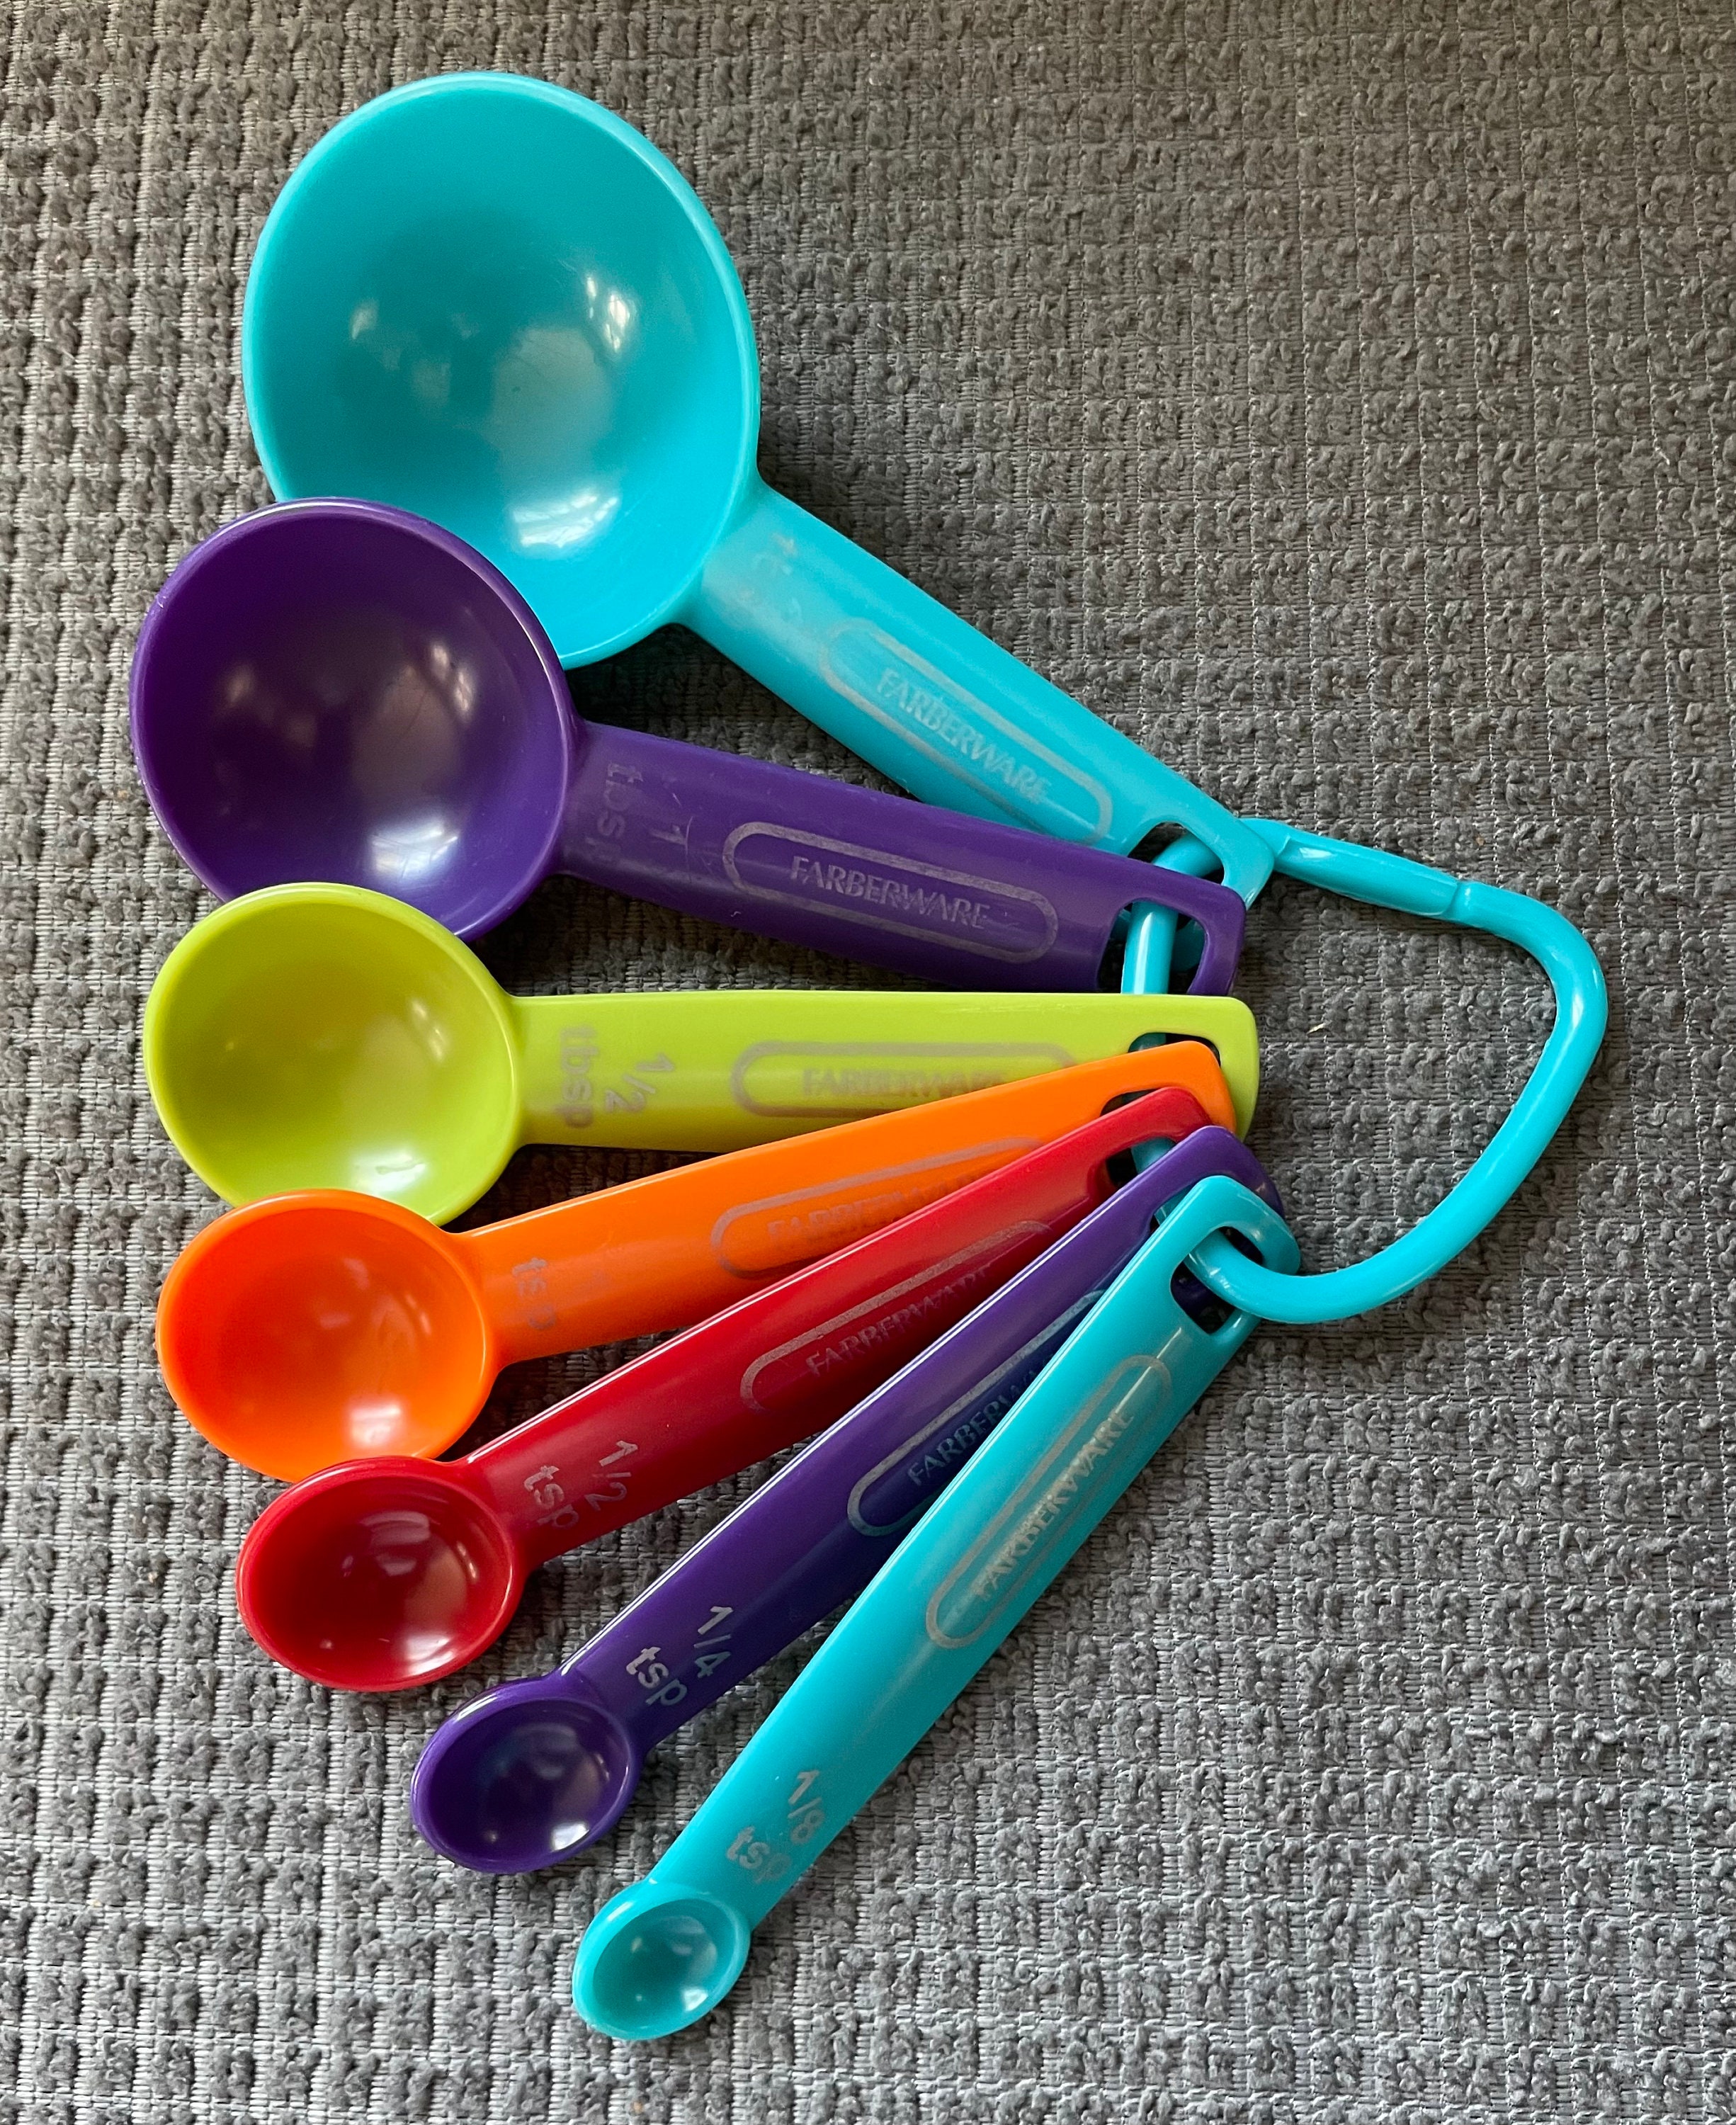 Farberware, Kitchen, Measuring Spoons And Measuring Cups